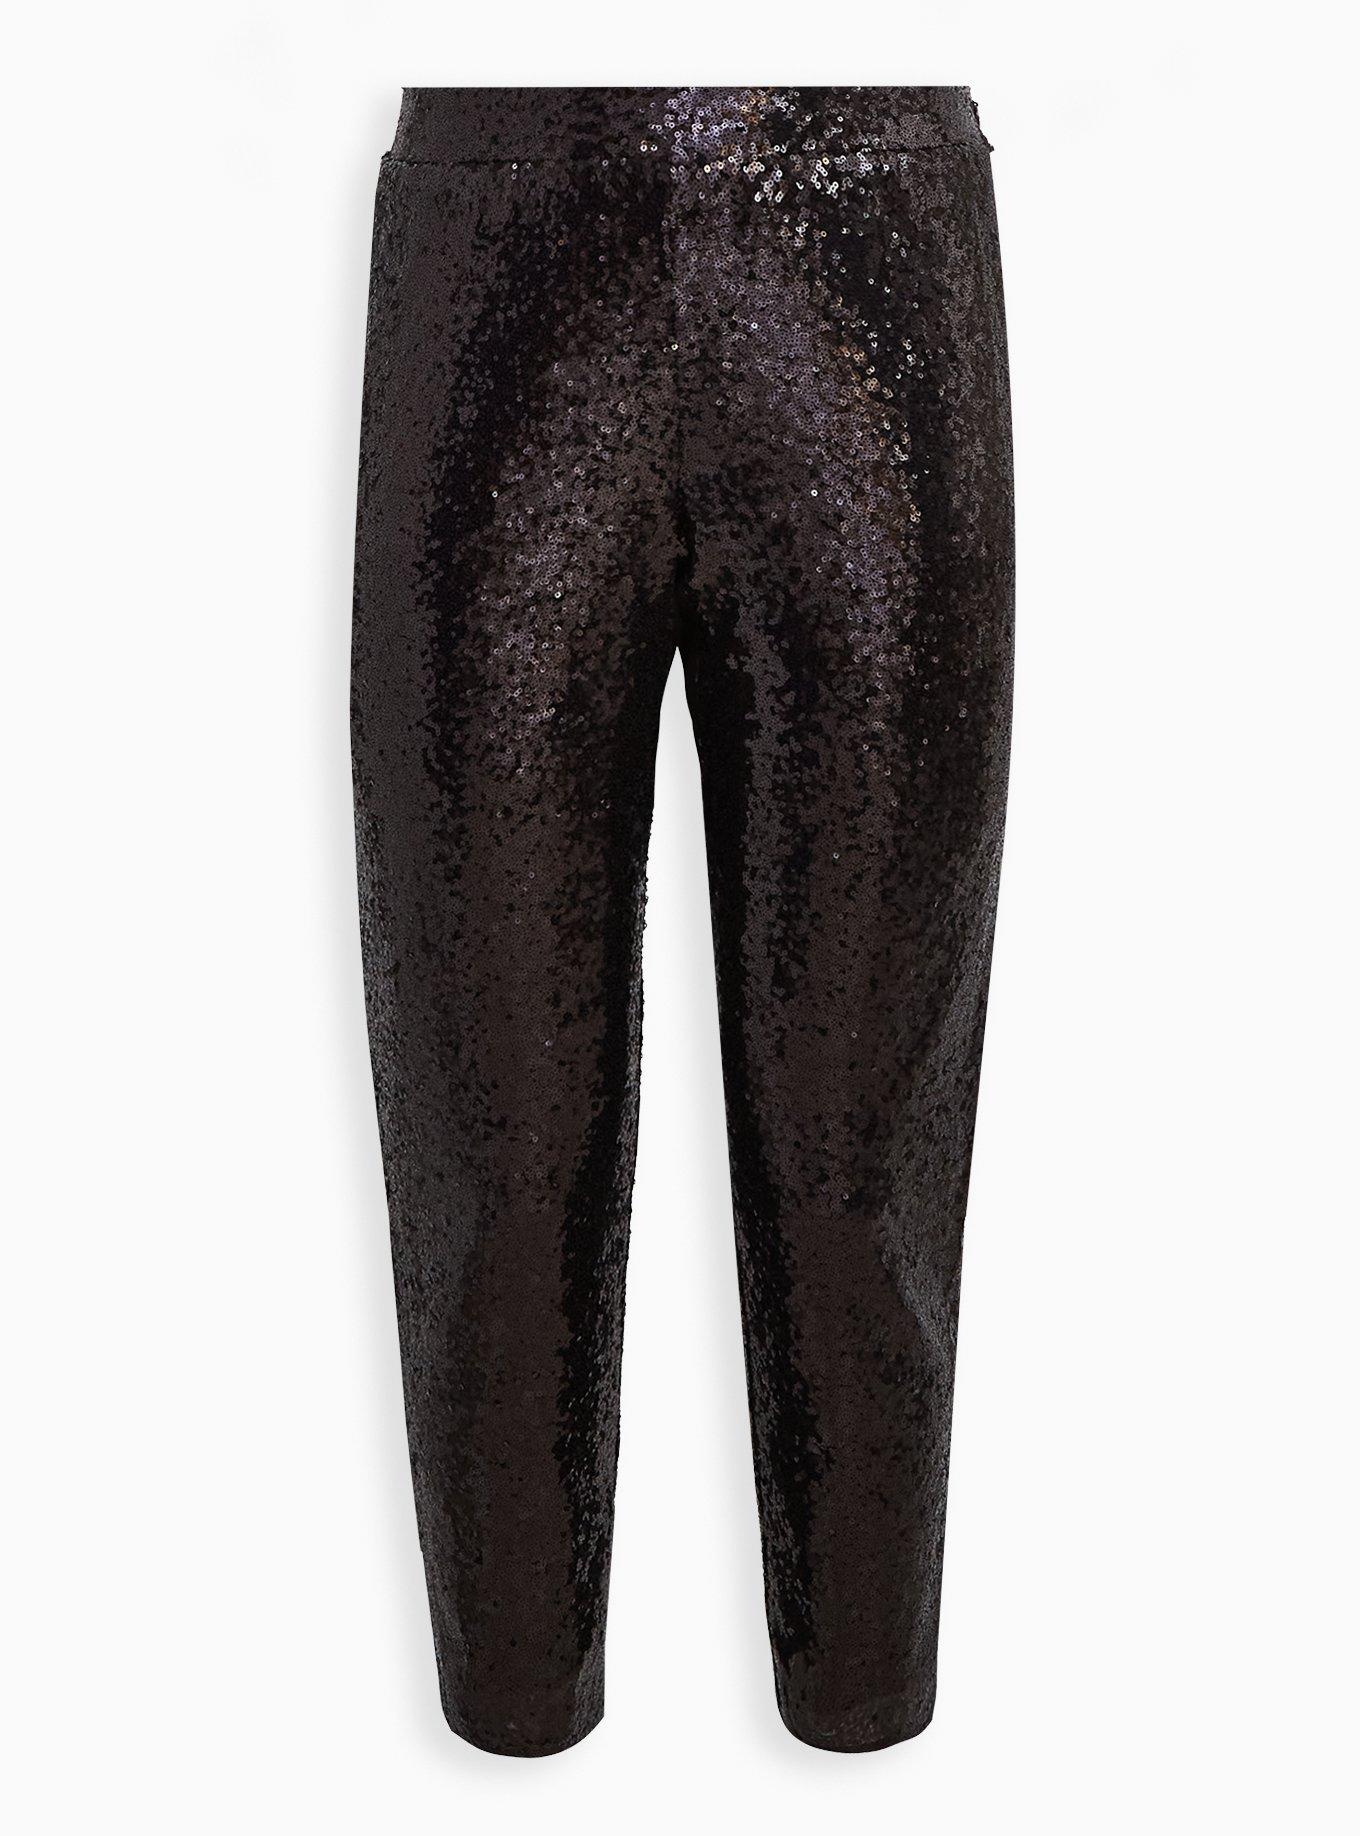 Curvy and Missy Black Sequin Pants